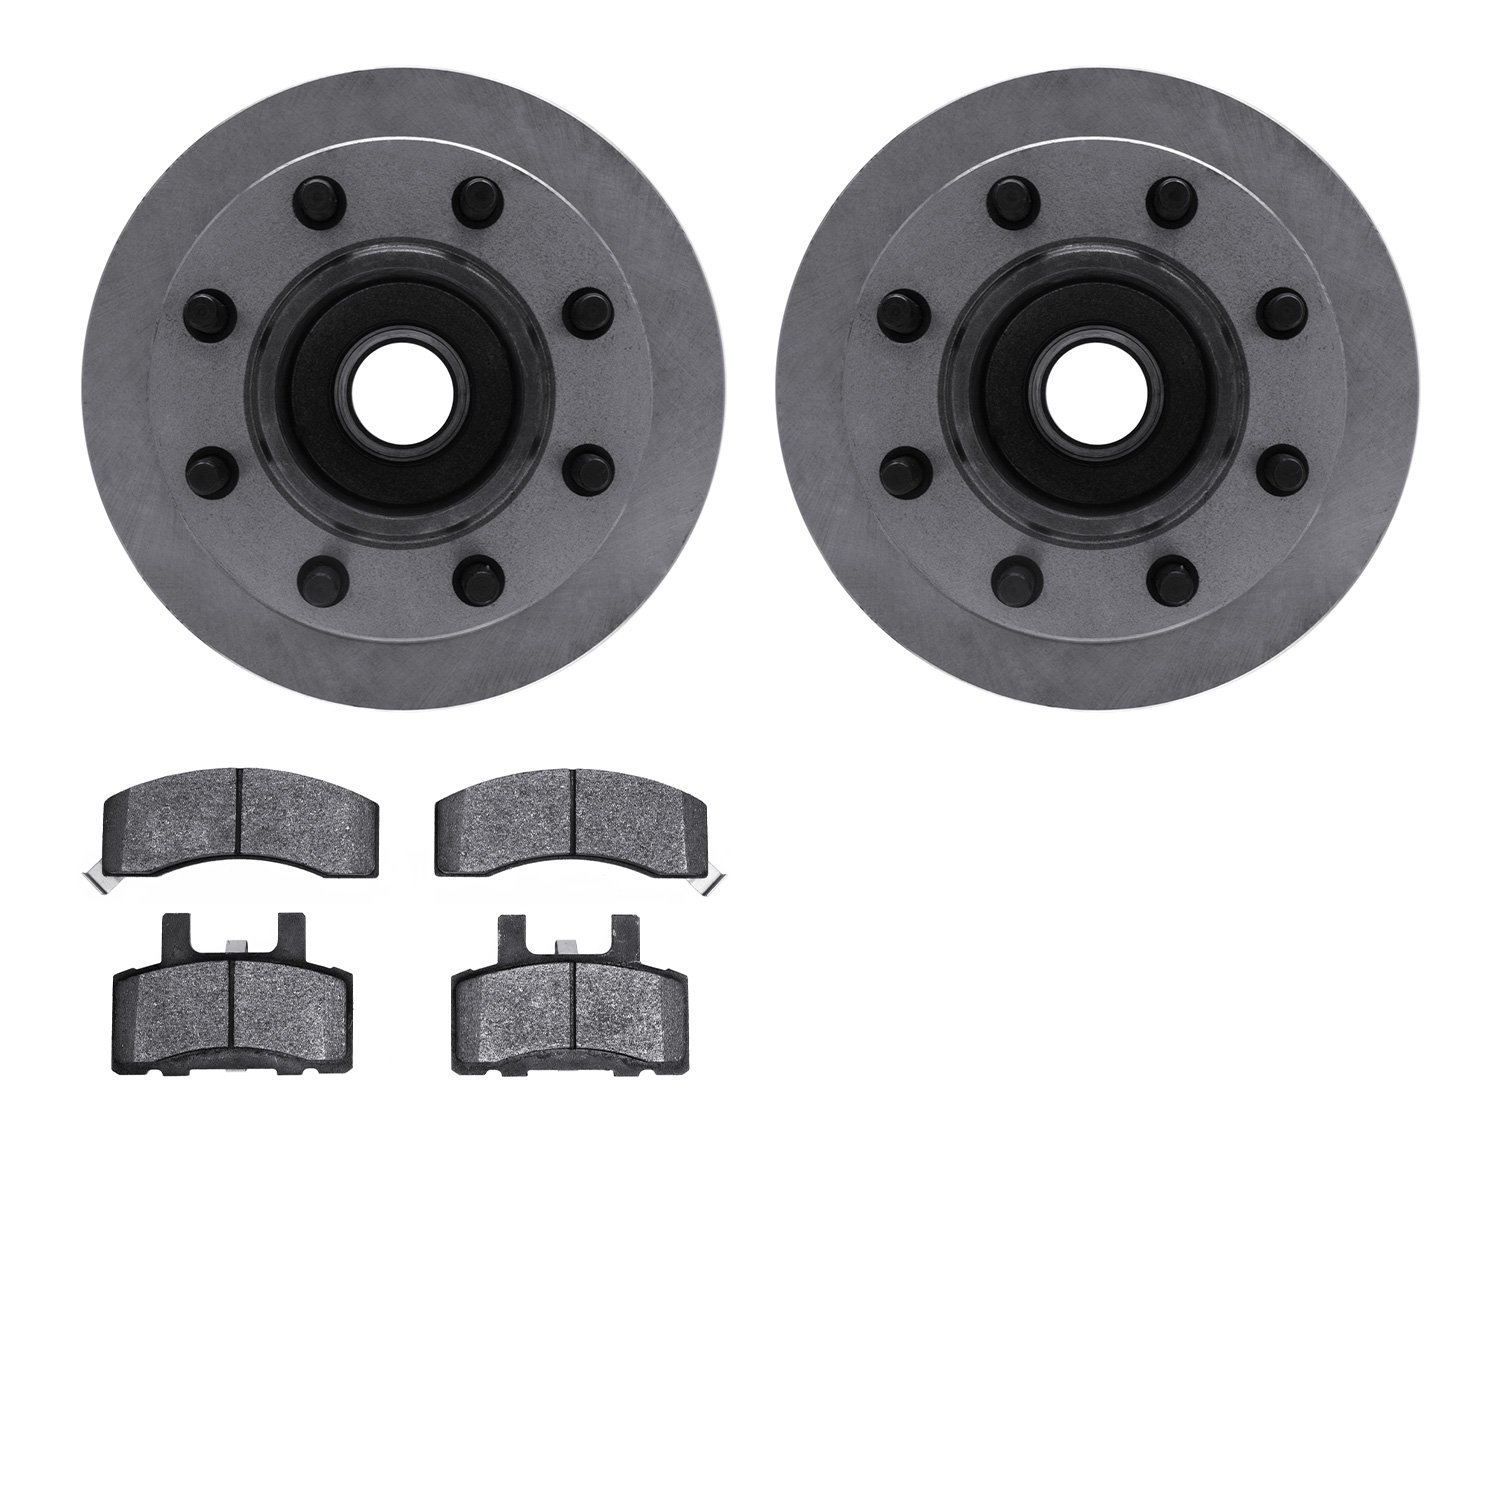 6402-48019 Brake Rotors with Ultimate-Duty Brake Pads, 1988-1989 GM, Position: Front